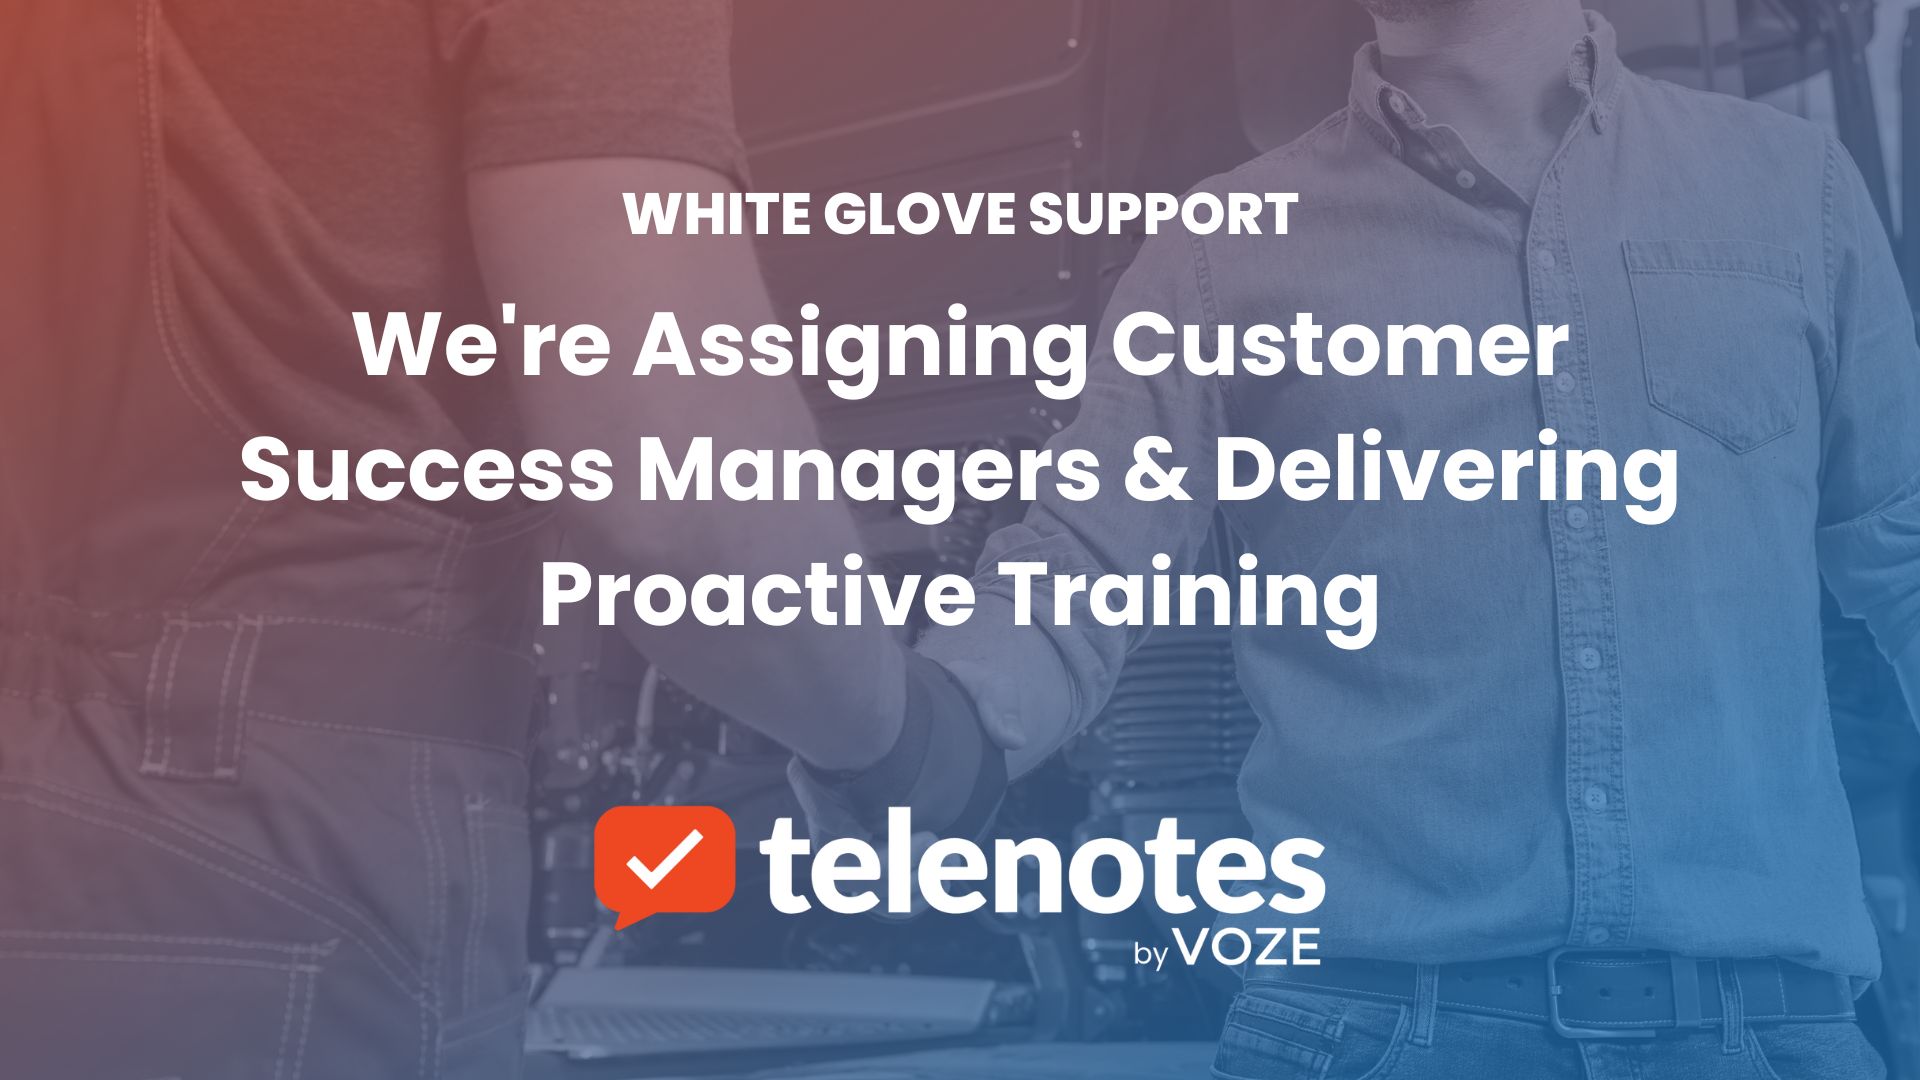 White Glove Support: We’re Assigning Customer Success Managers & Delivering Proactive Training